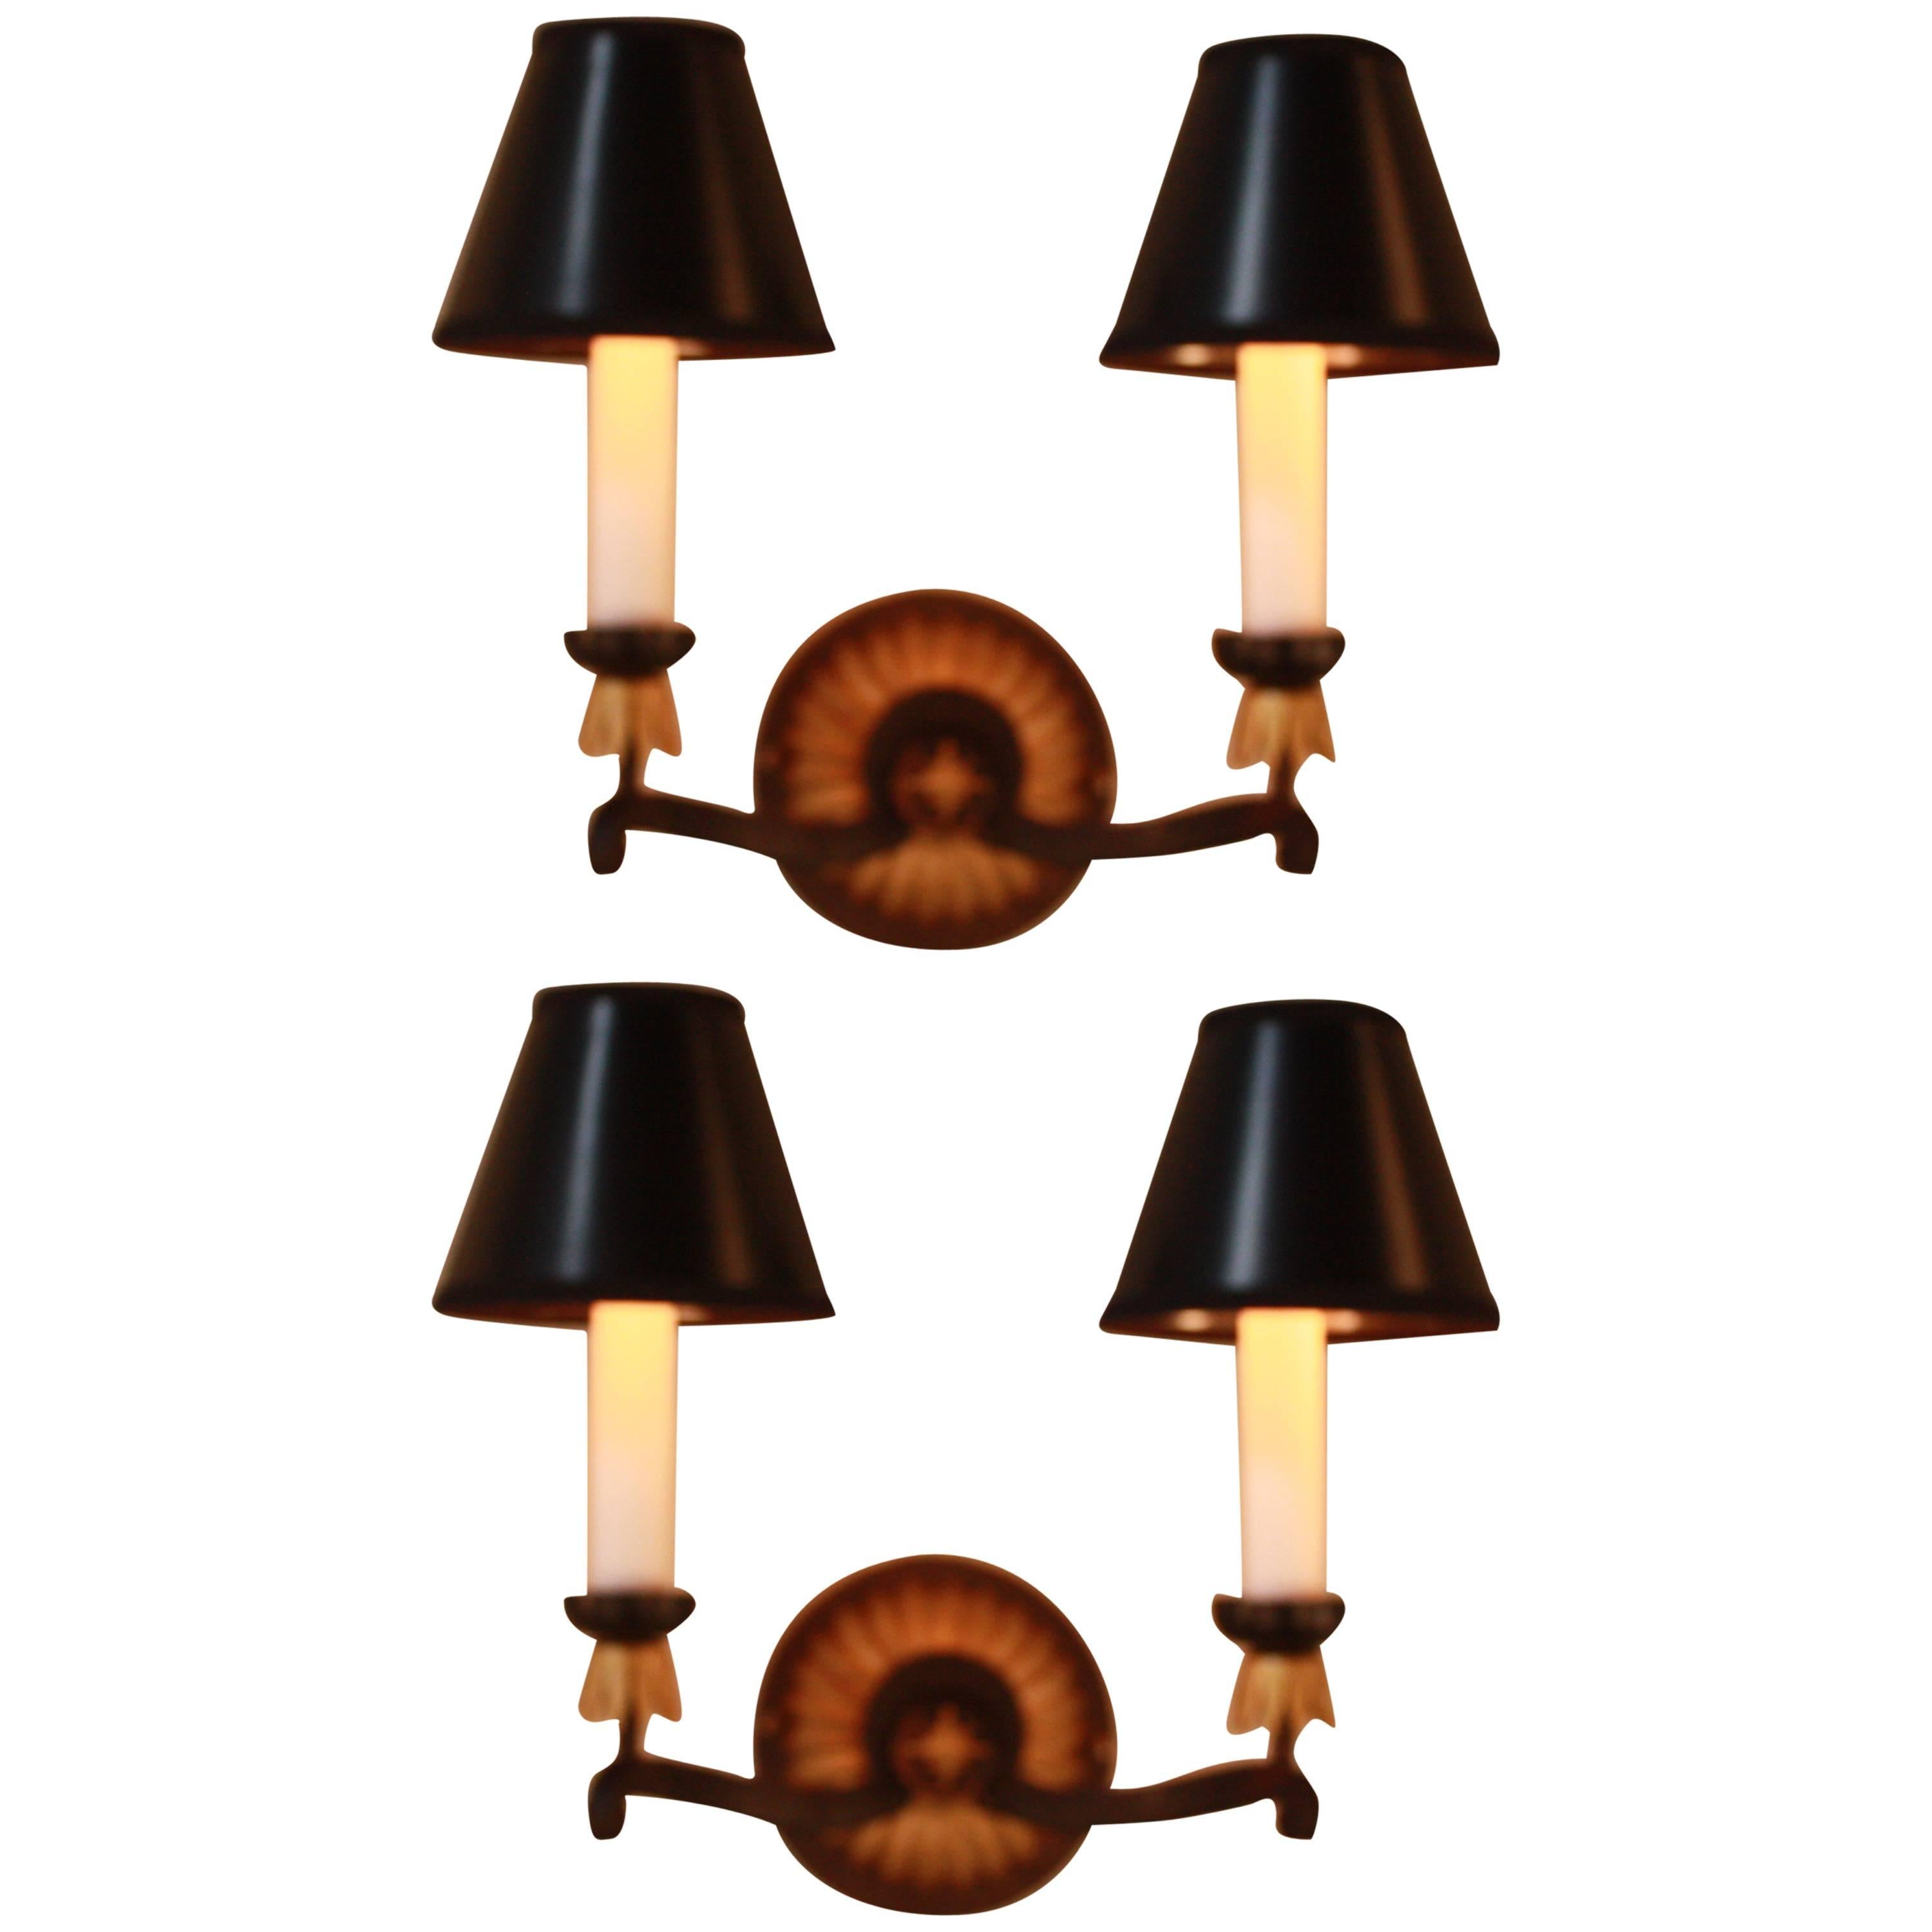 Pair of Iron and Gold Leaf Wood Wall Sconces